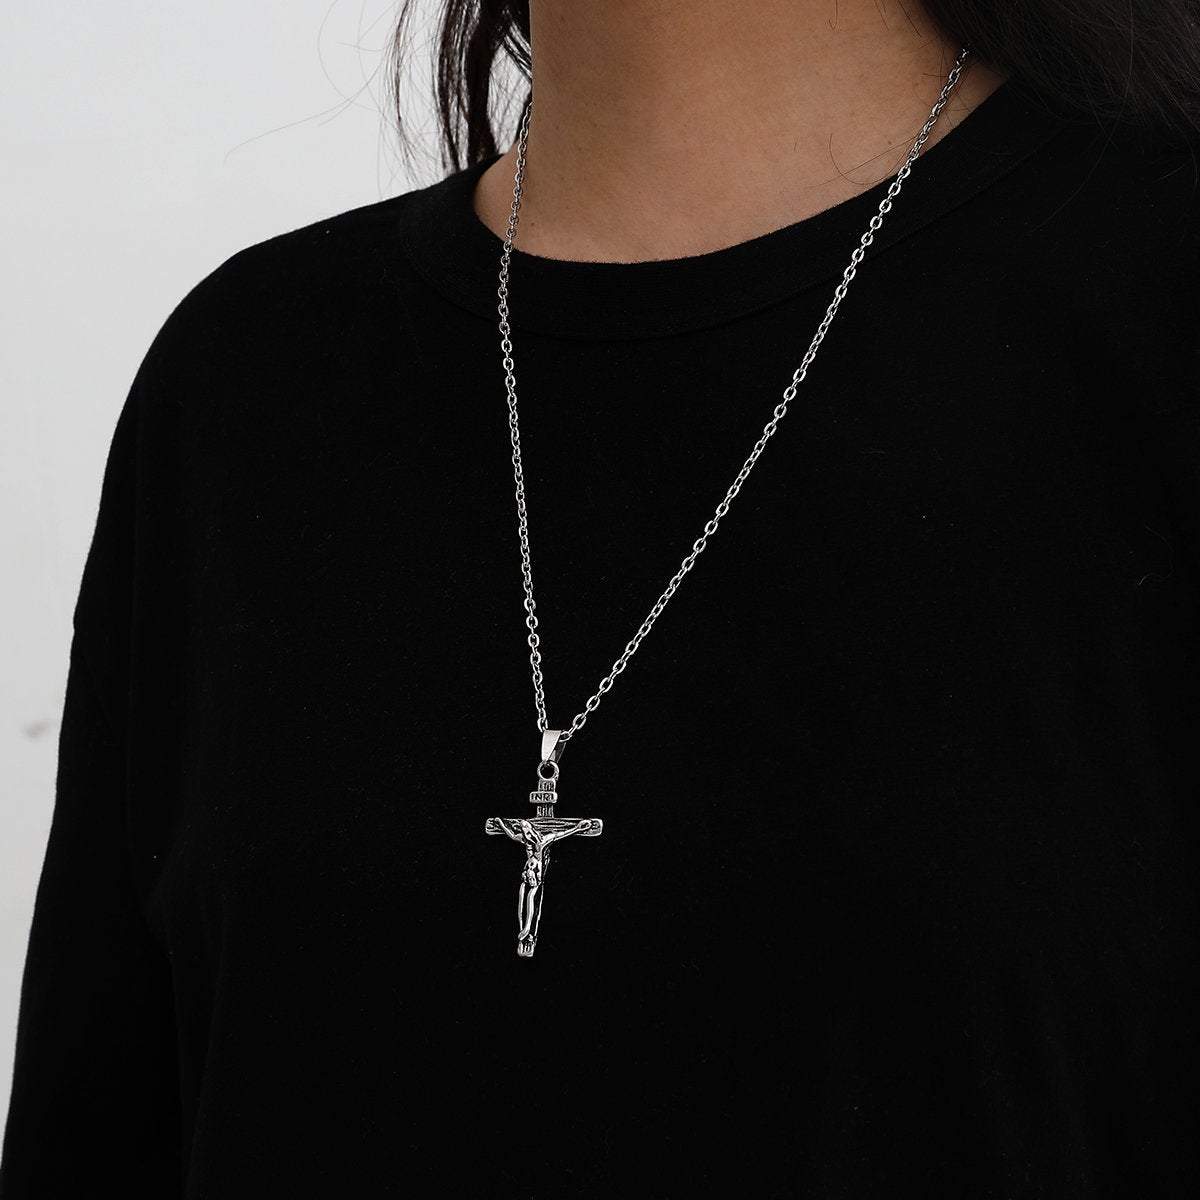 Iconic | Silver-Tone Stainless Steel Cross Curb Chain Necklace